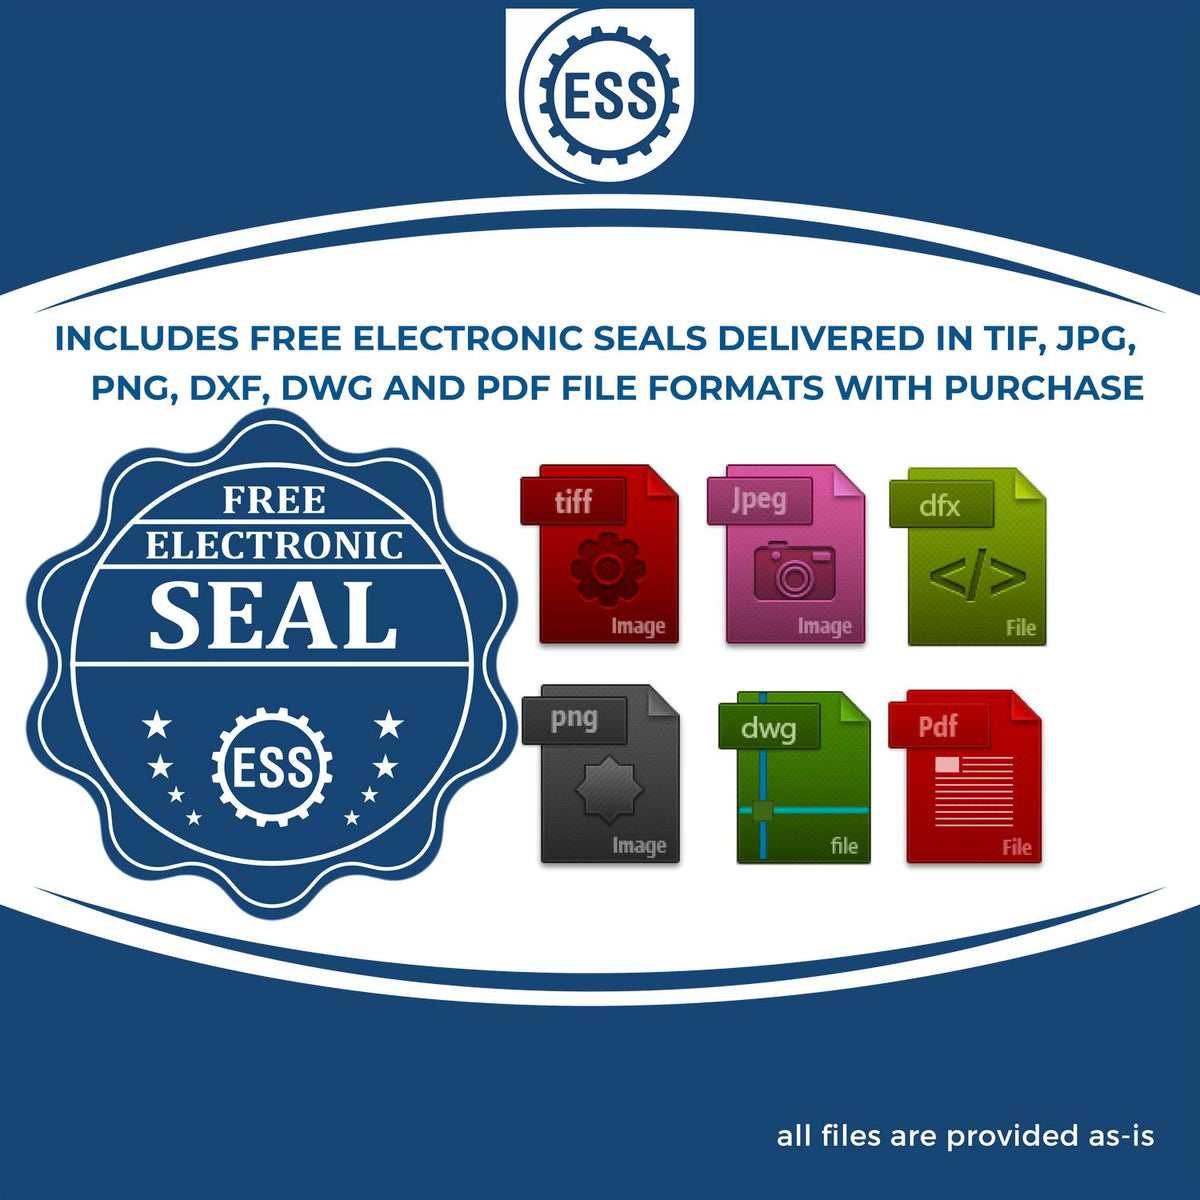 An infographic for the free electronic seal for the Hybrid West Virginia Engineer Seal illustrating the different file type icons such as DXF, DWG, TIF, JPG and PNG.